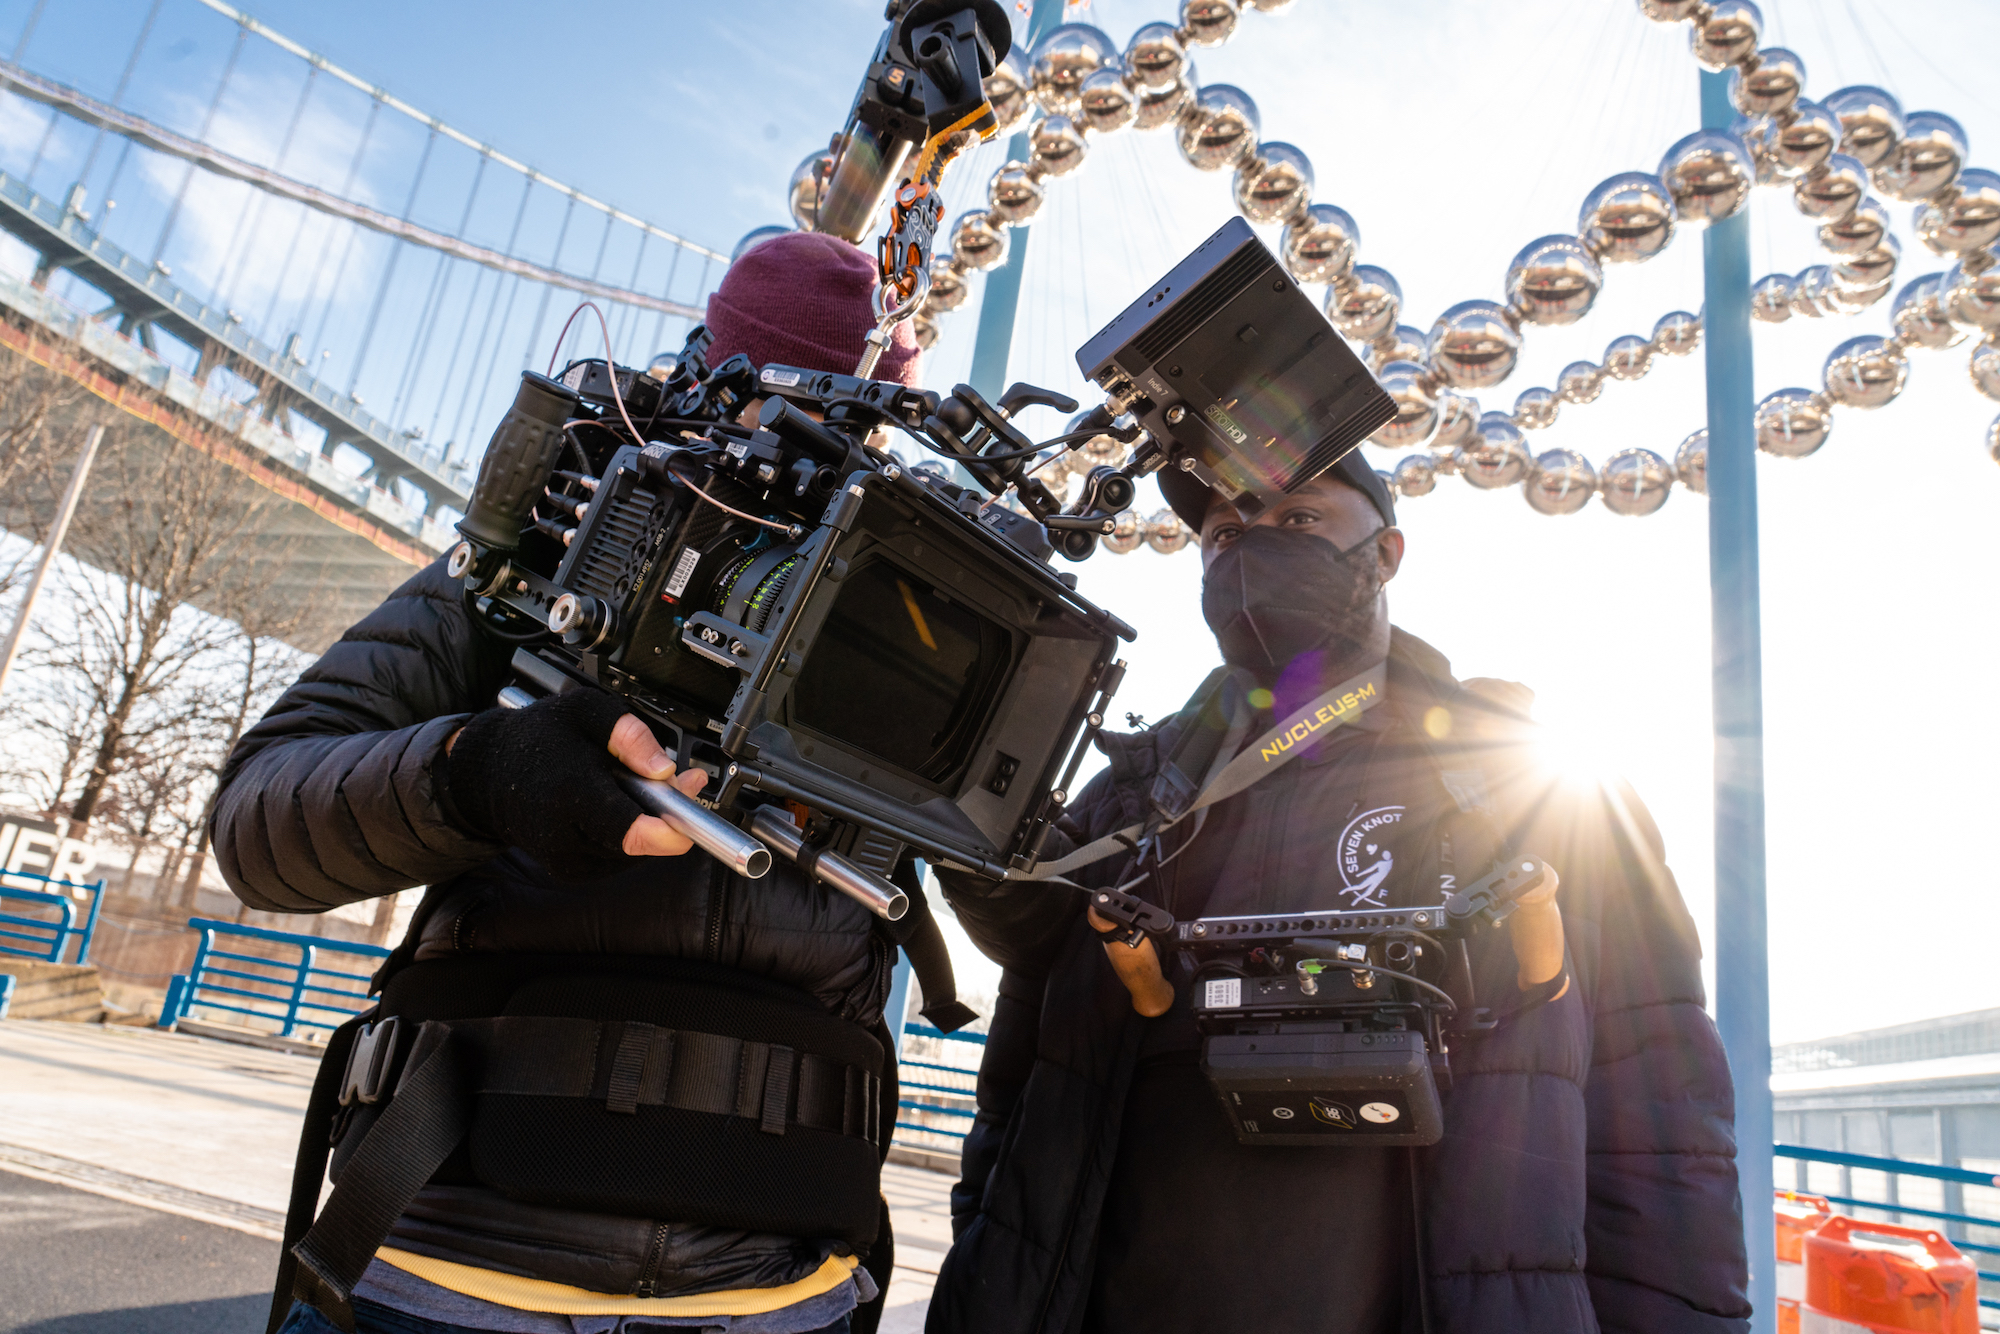 Hometeam Filmmakers Collin Welch (left) and Biron Shockley (right) on location in Philadelphia, Pennsylvania